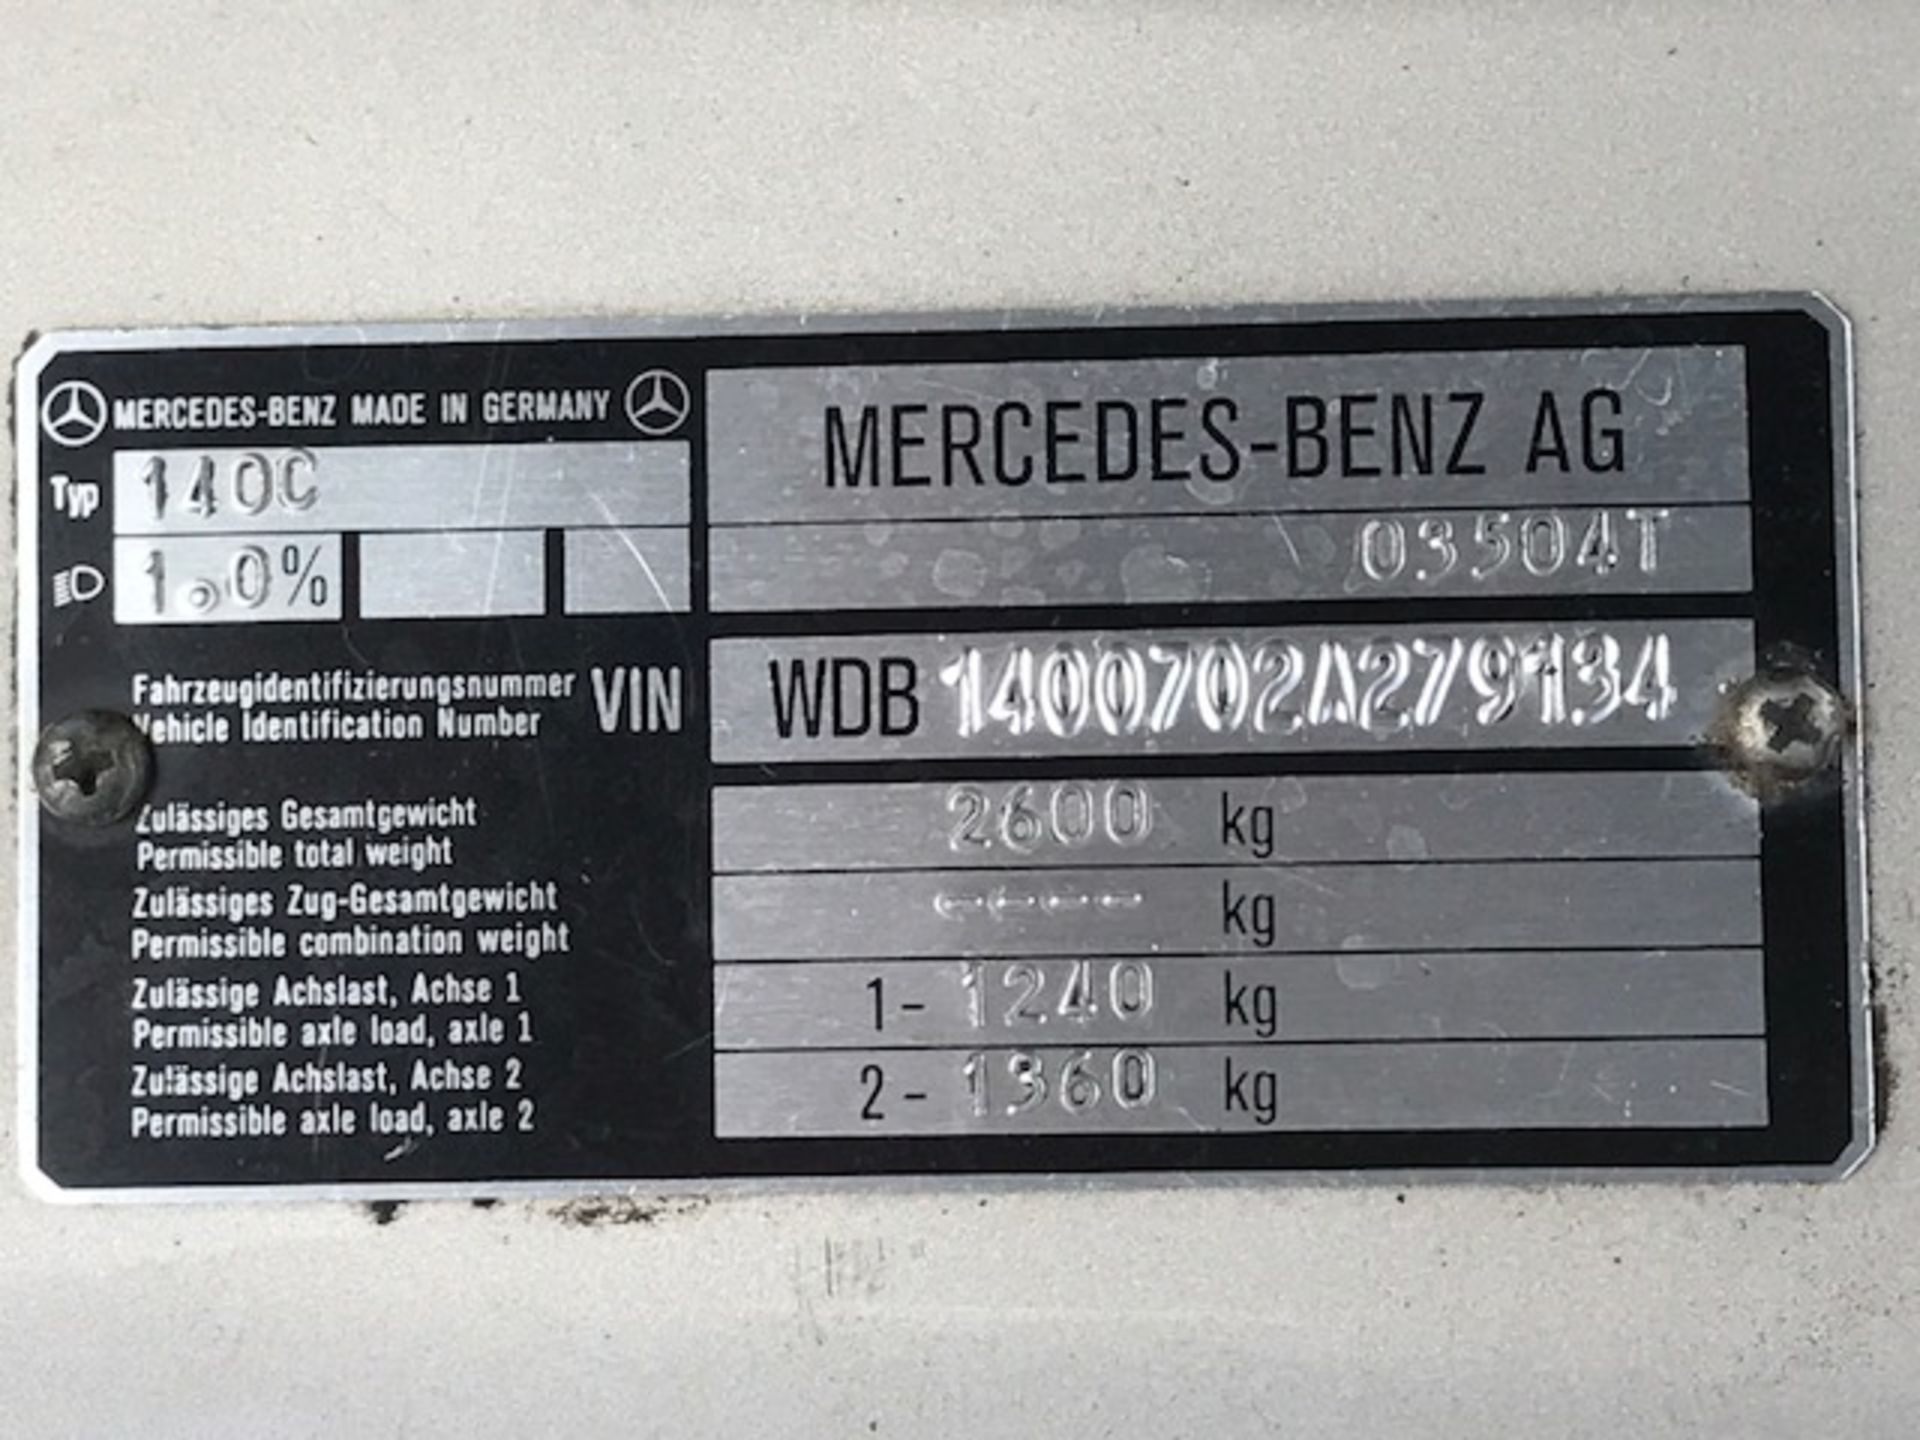 1995 Mercedes 500 Coupe (Auto) - Image 7 of 14